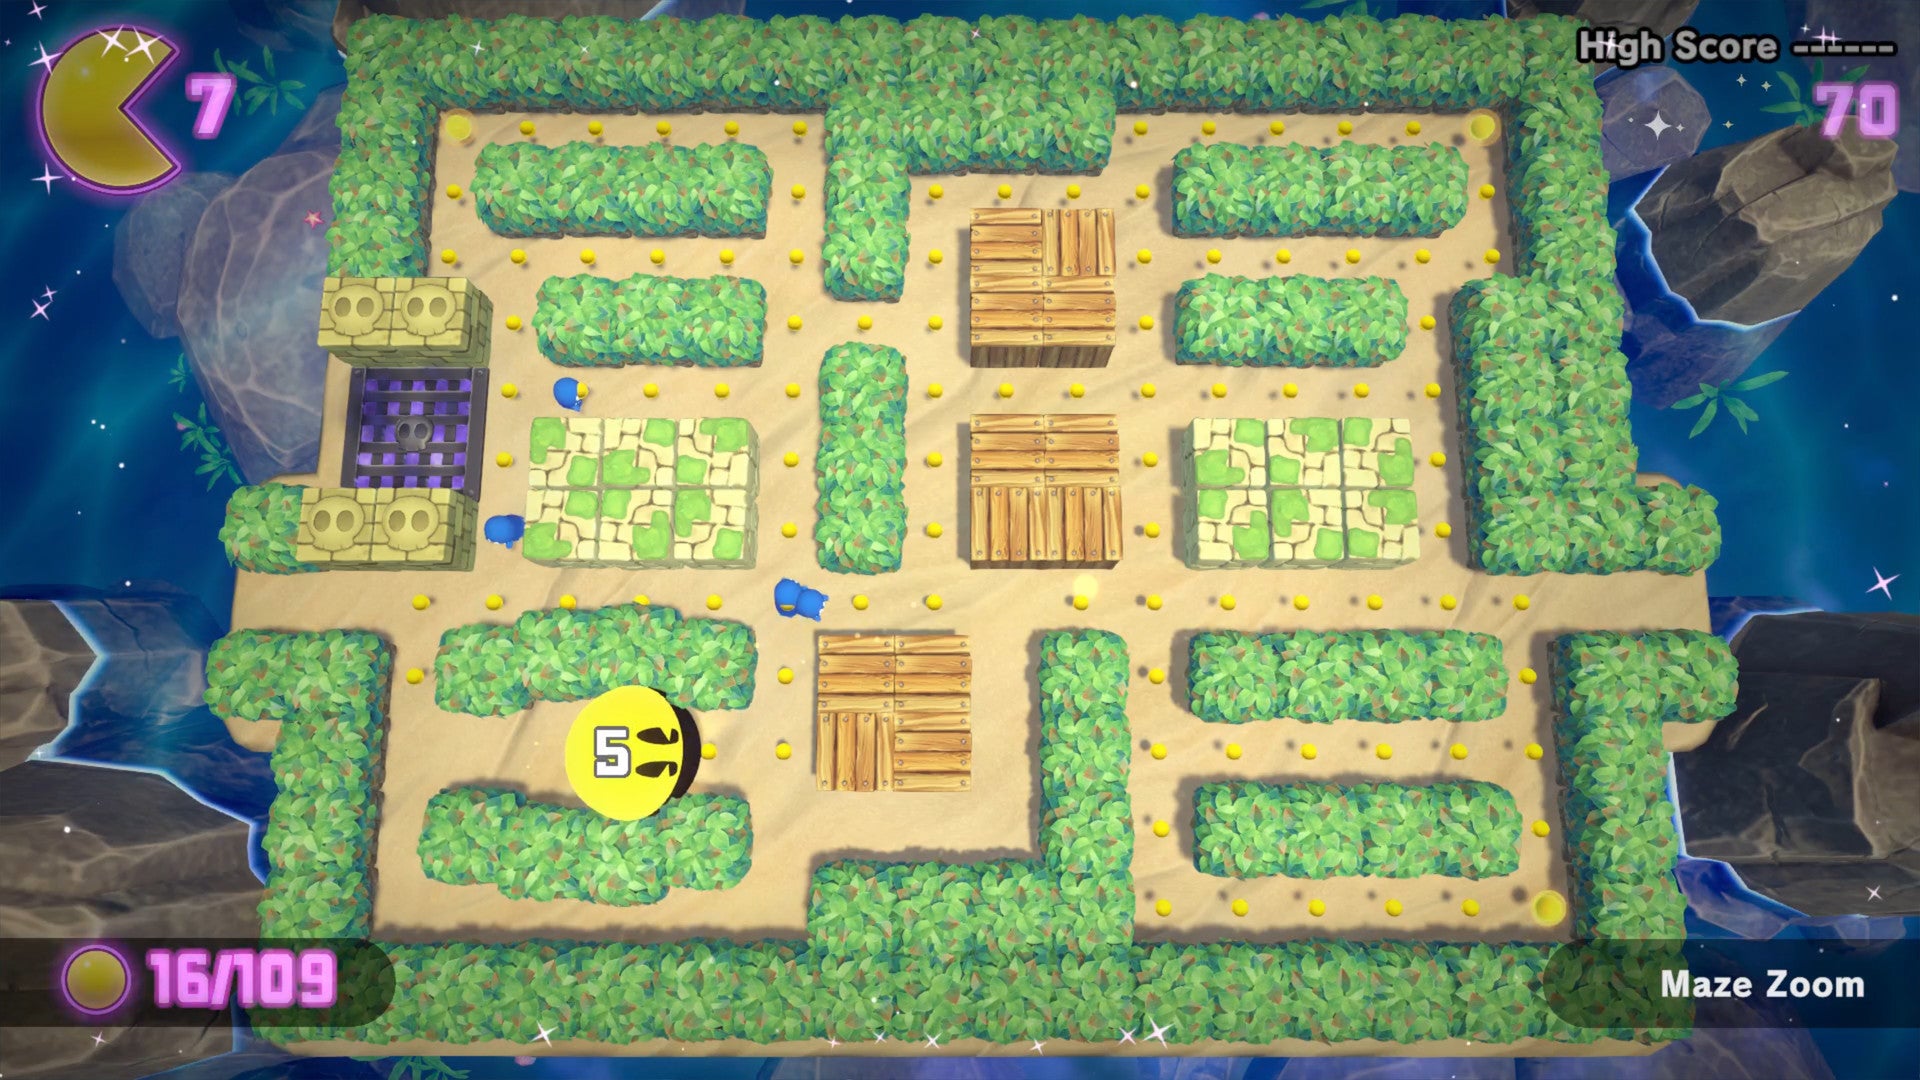 [PS4] PAC-MAN WORLD Re-PAC